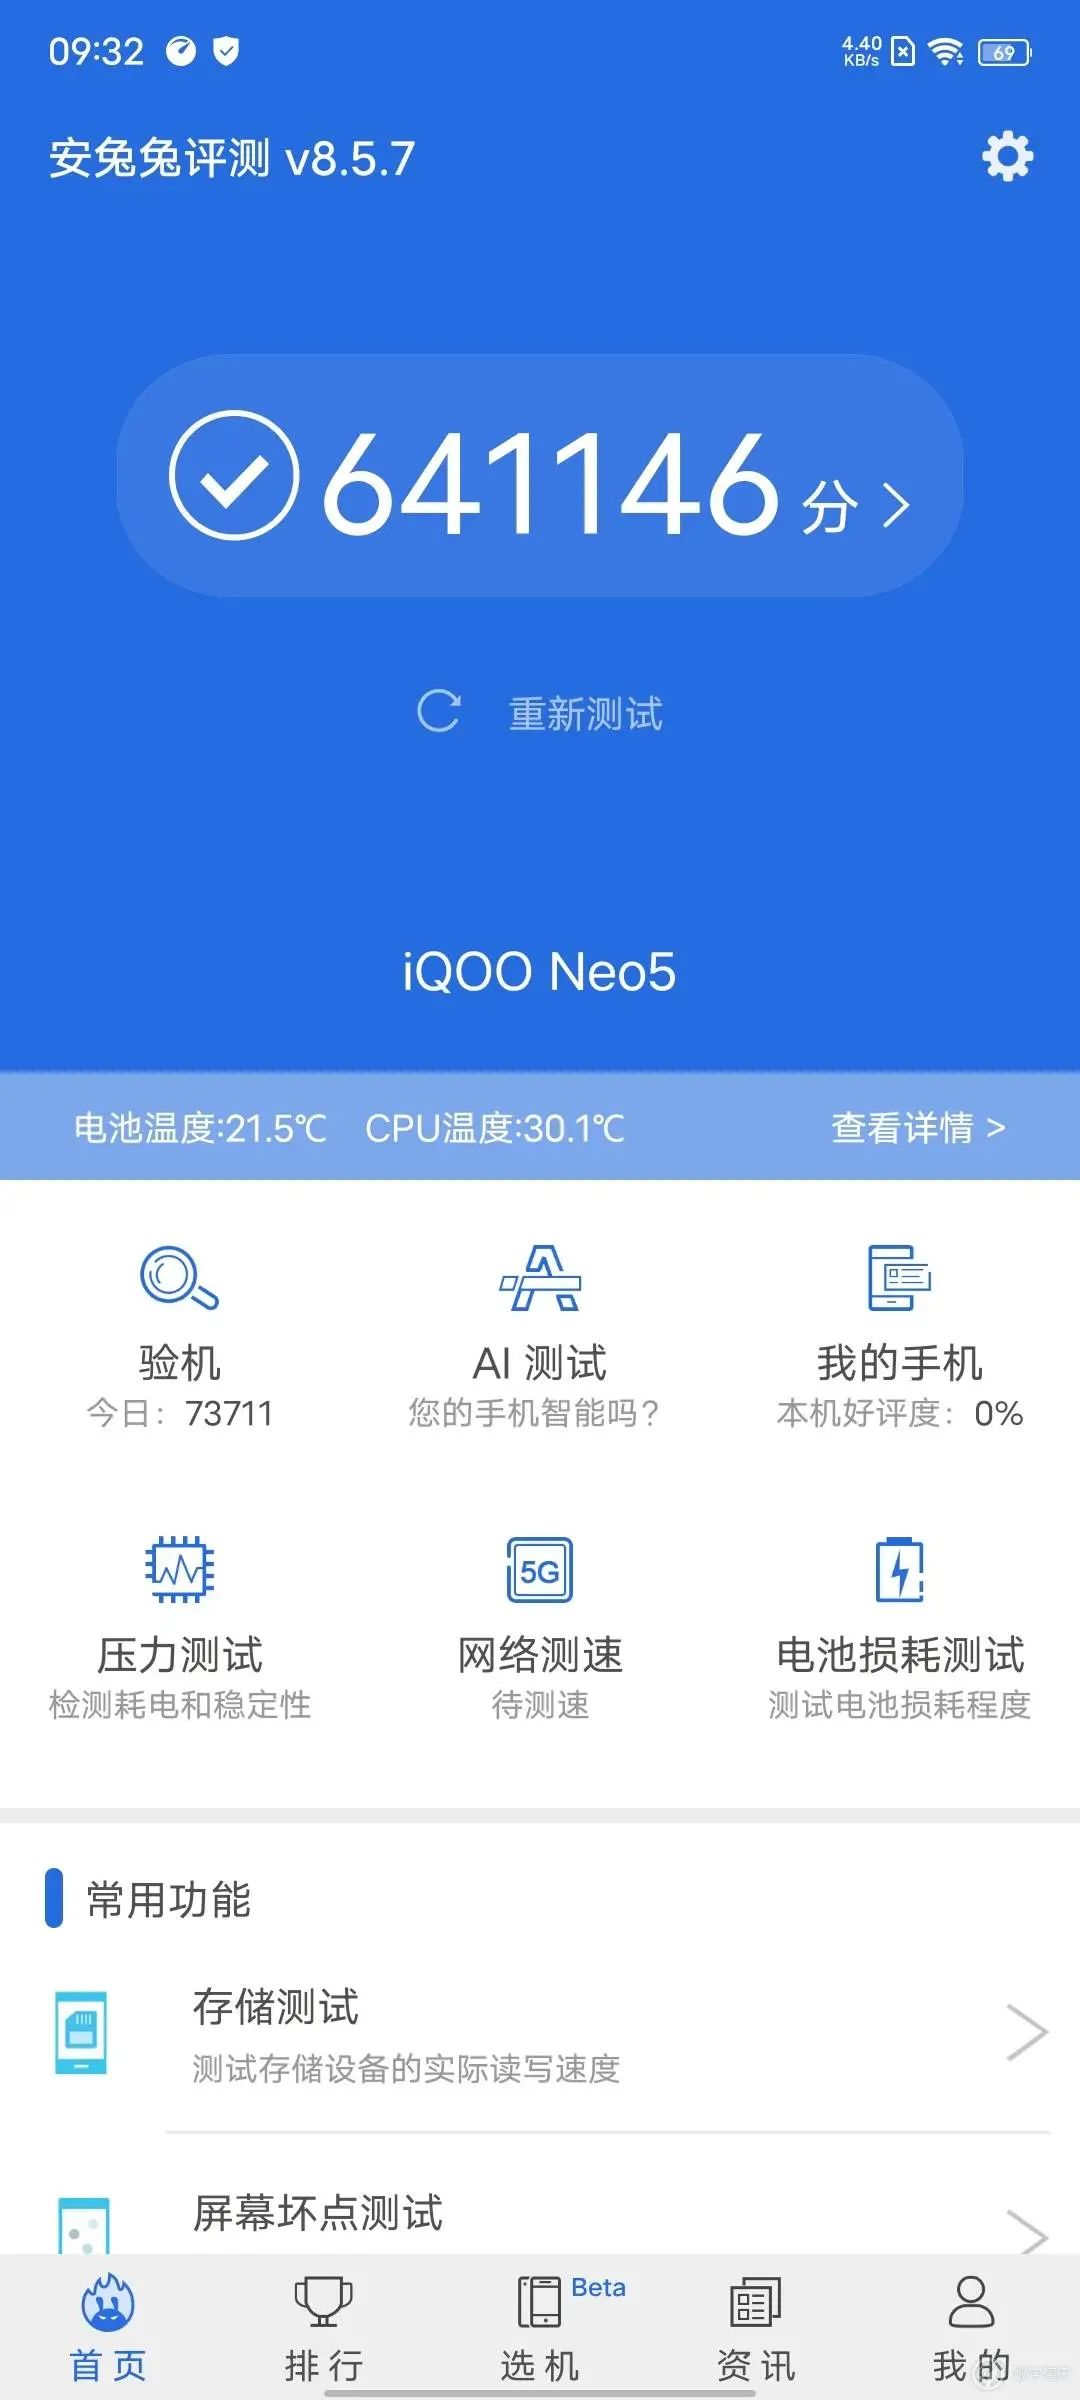 Vogue + naval vessel experiences Shuang Xinqi of electric contest IQOO Neo5